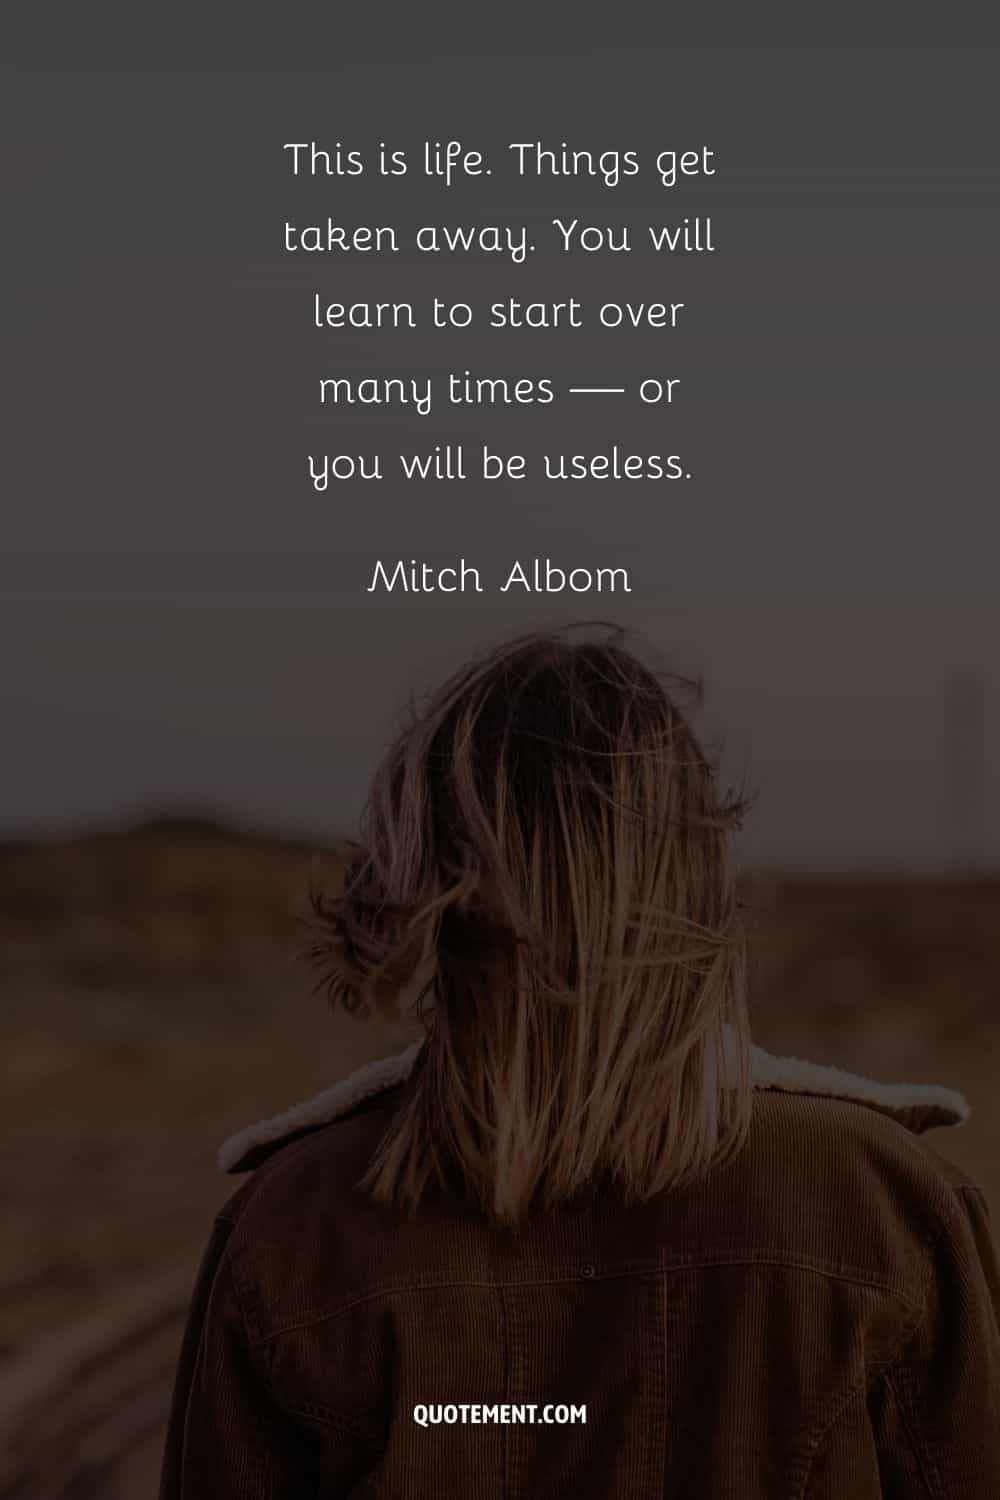 “This is life. Things get taken away. You will learn to start over many times — or you will be useless.” — Mitch Albom